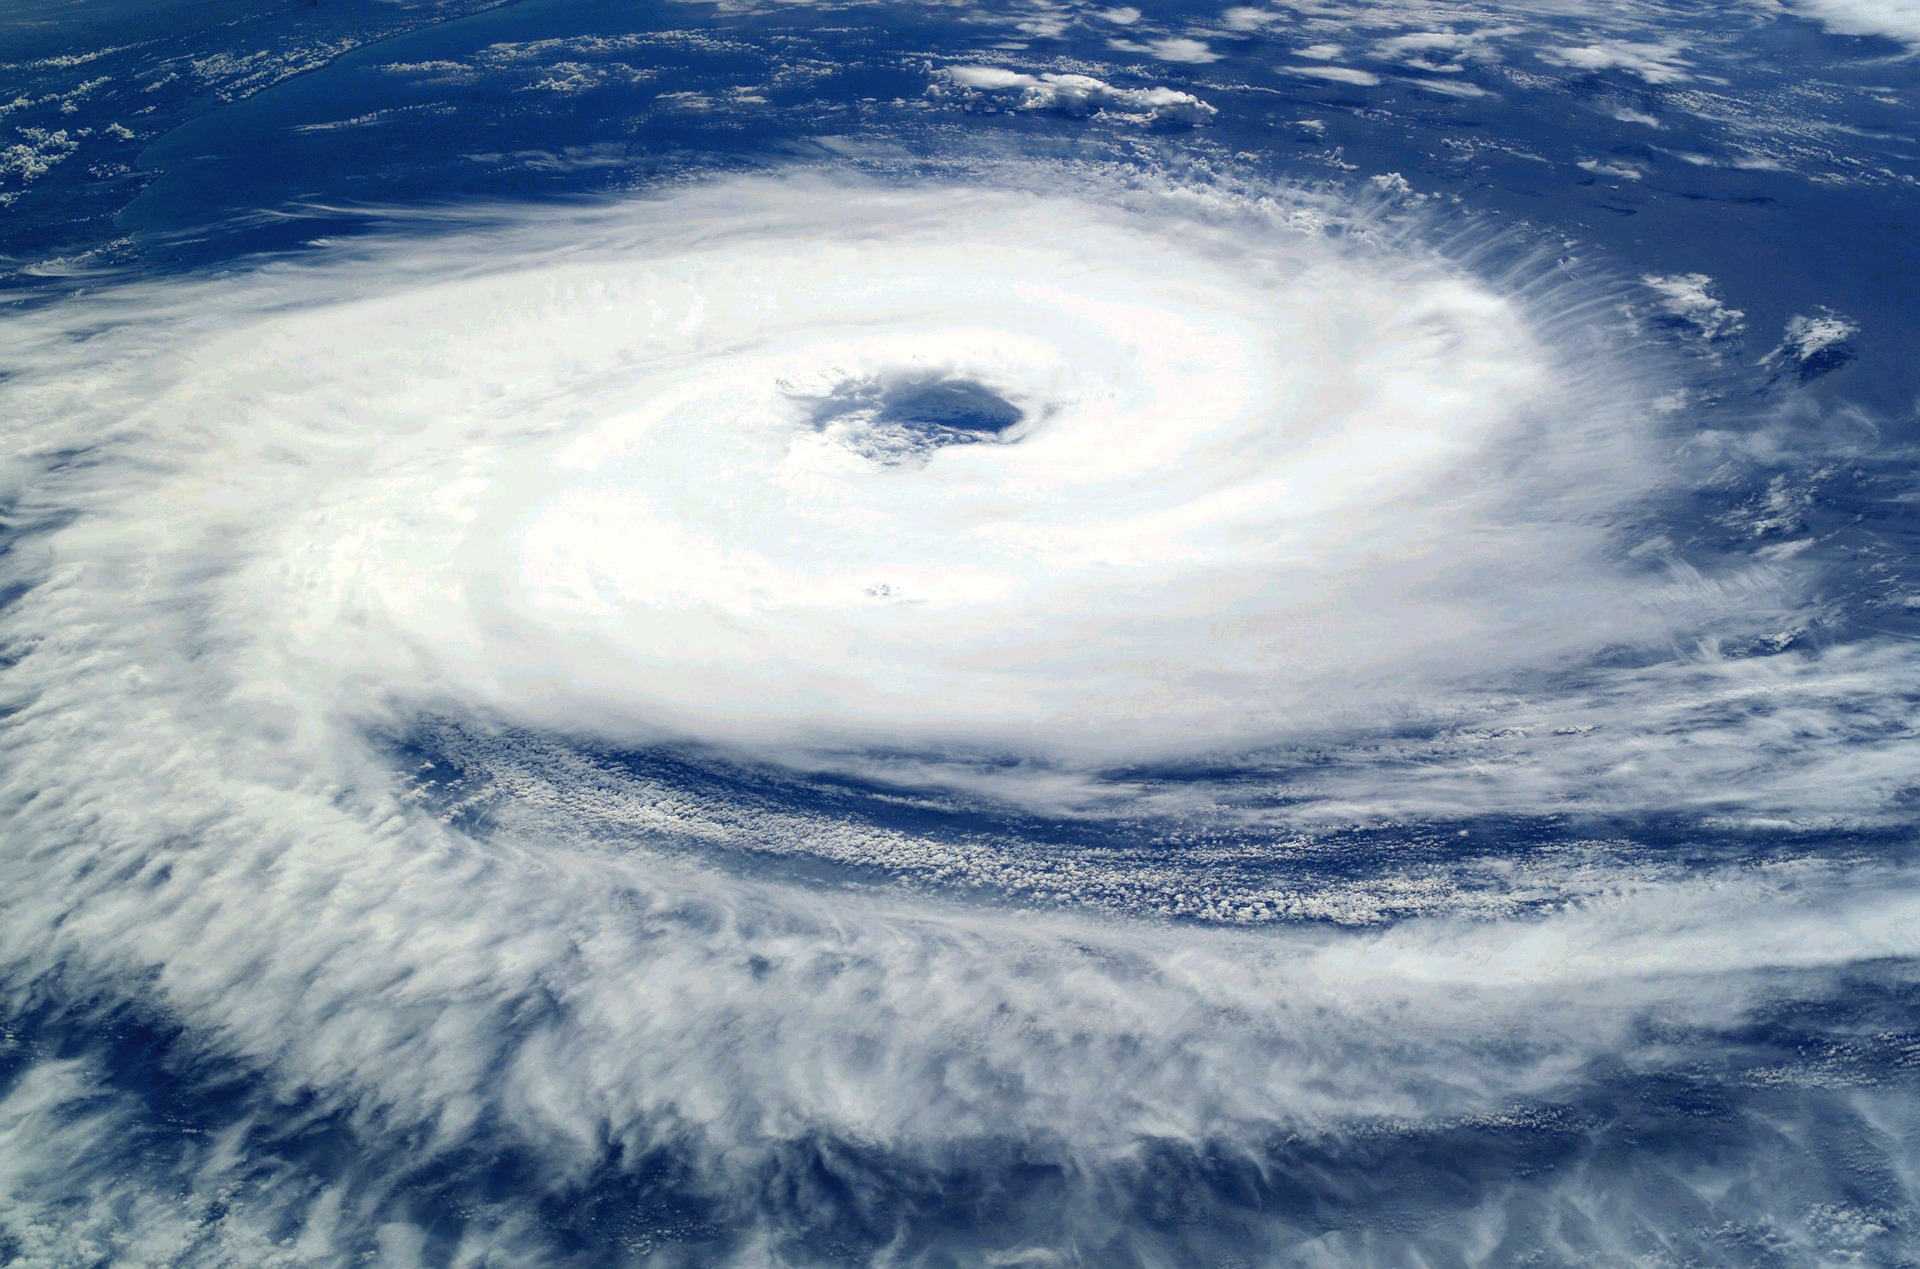 As if things haven’t been screwy enough, it’s time for the Atlantic Hurricane Season